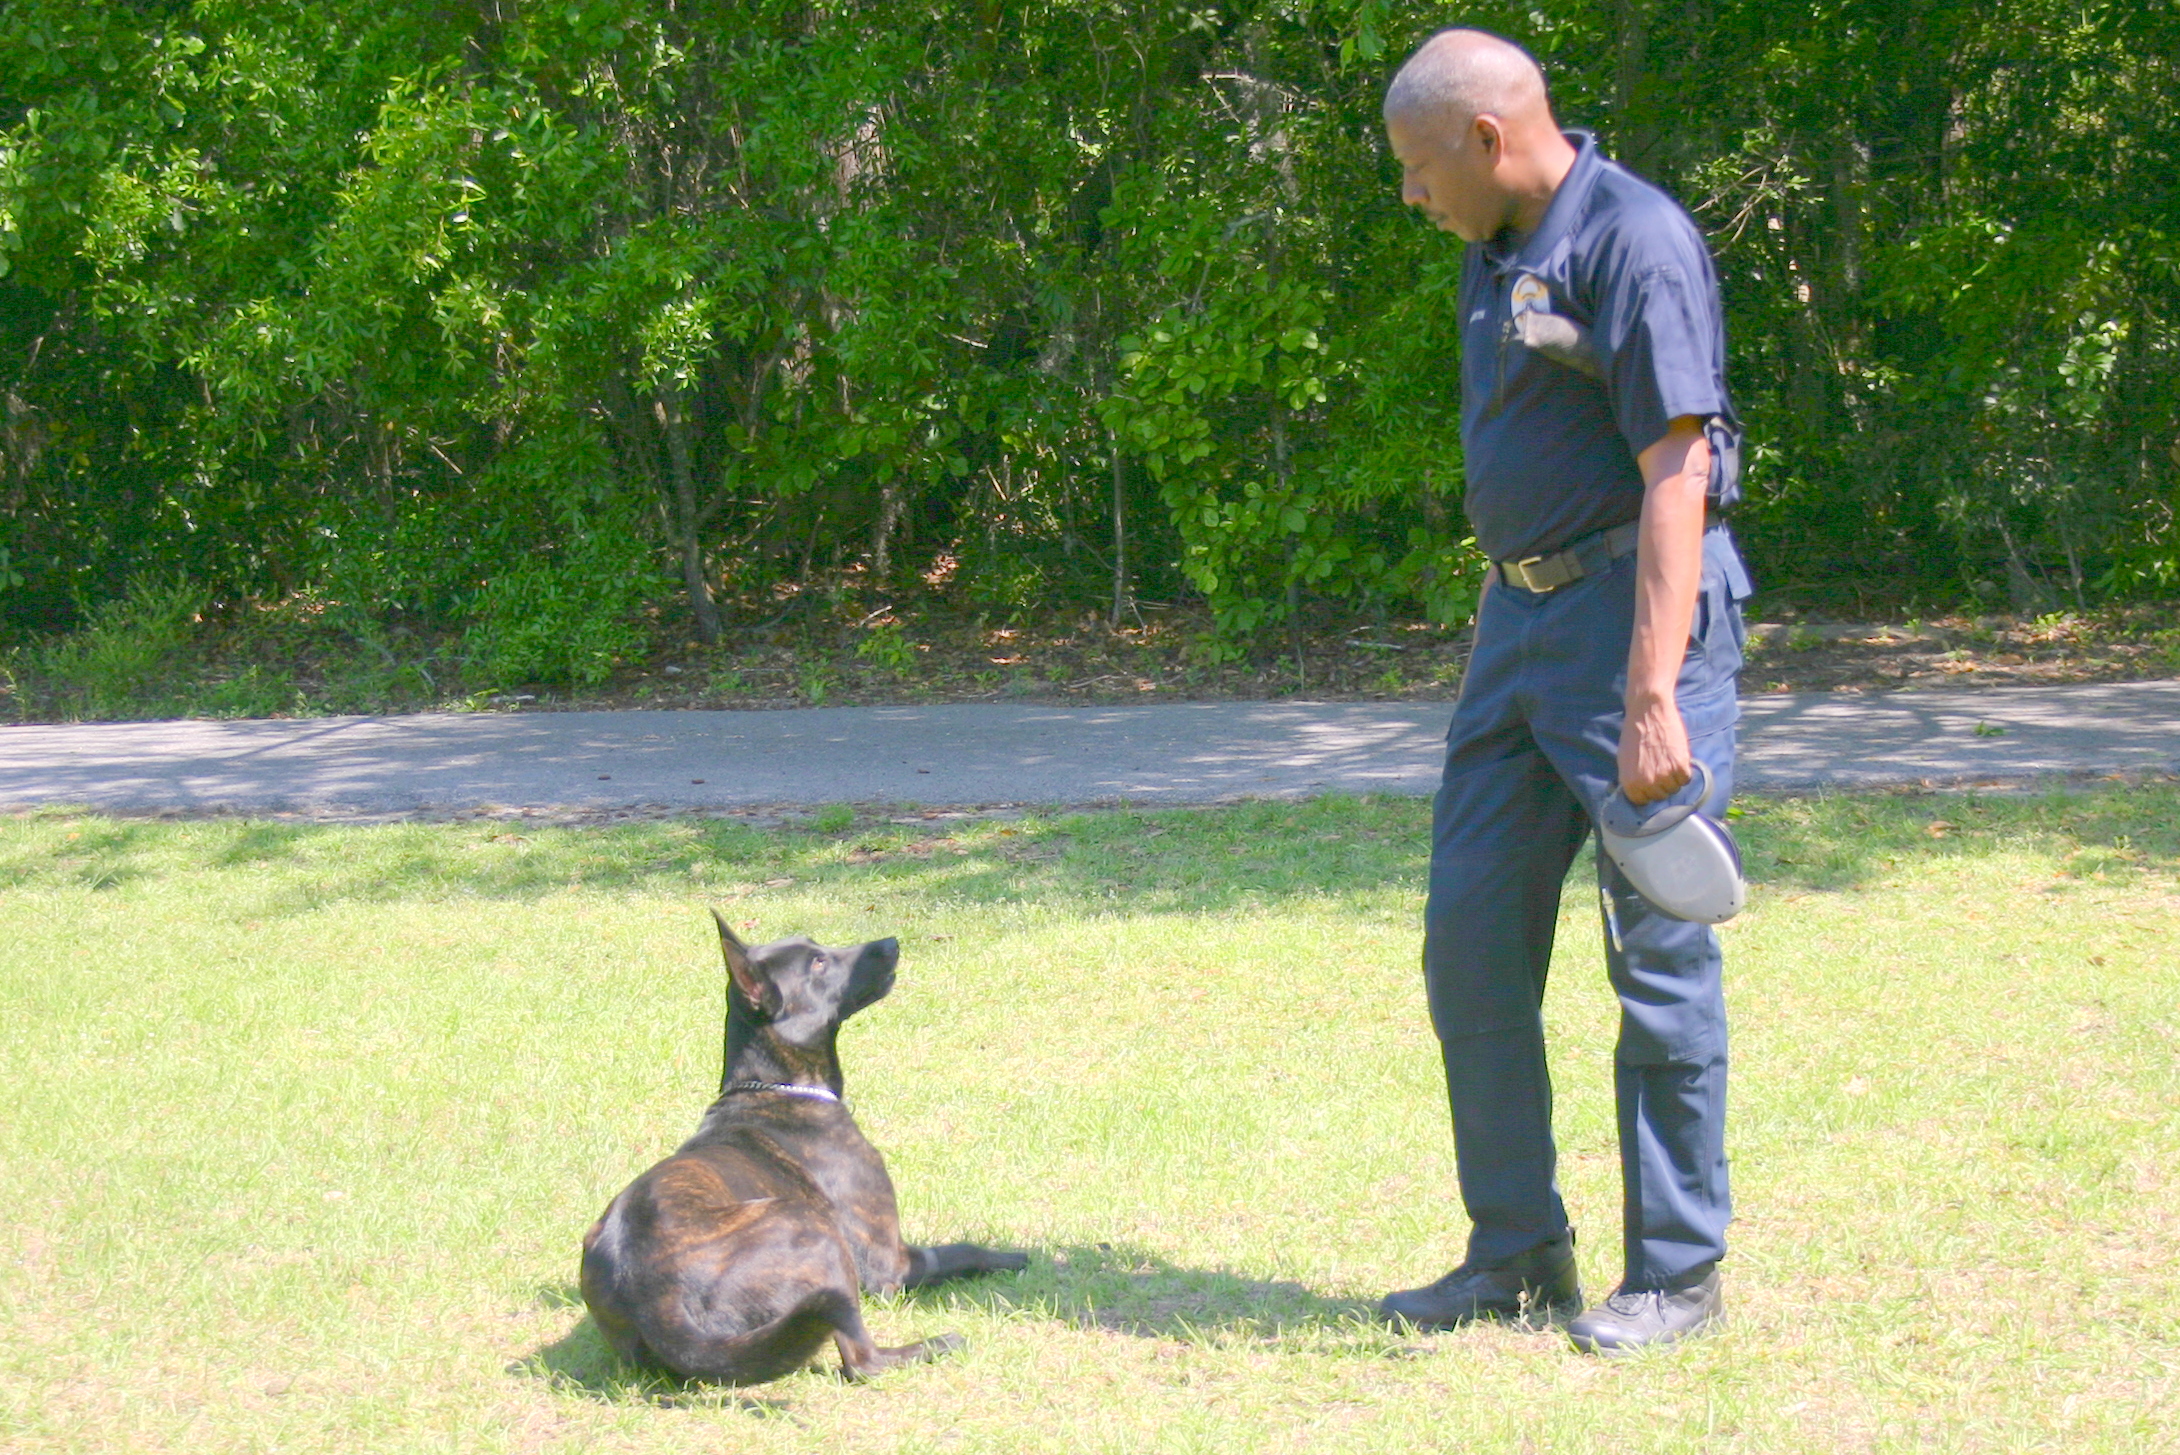 Ziggy signals to his partner Ofc. Mike Drayton that he has found a shell casing.